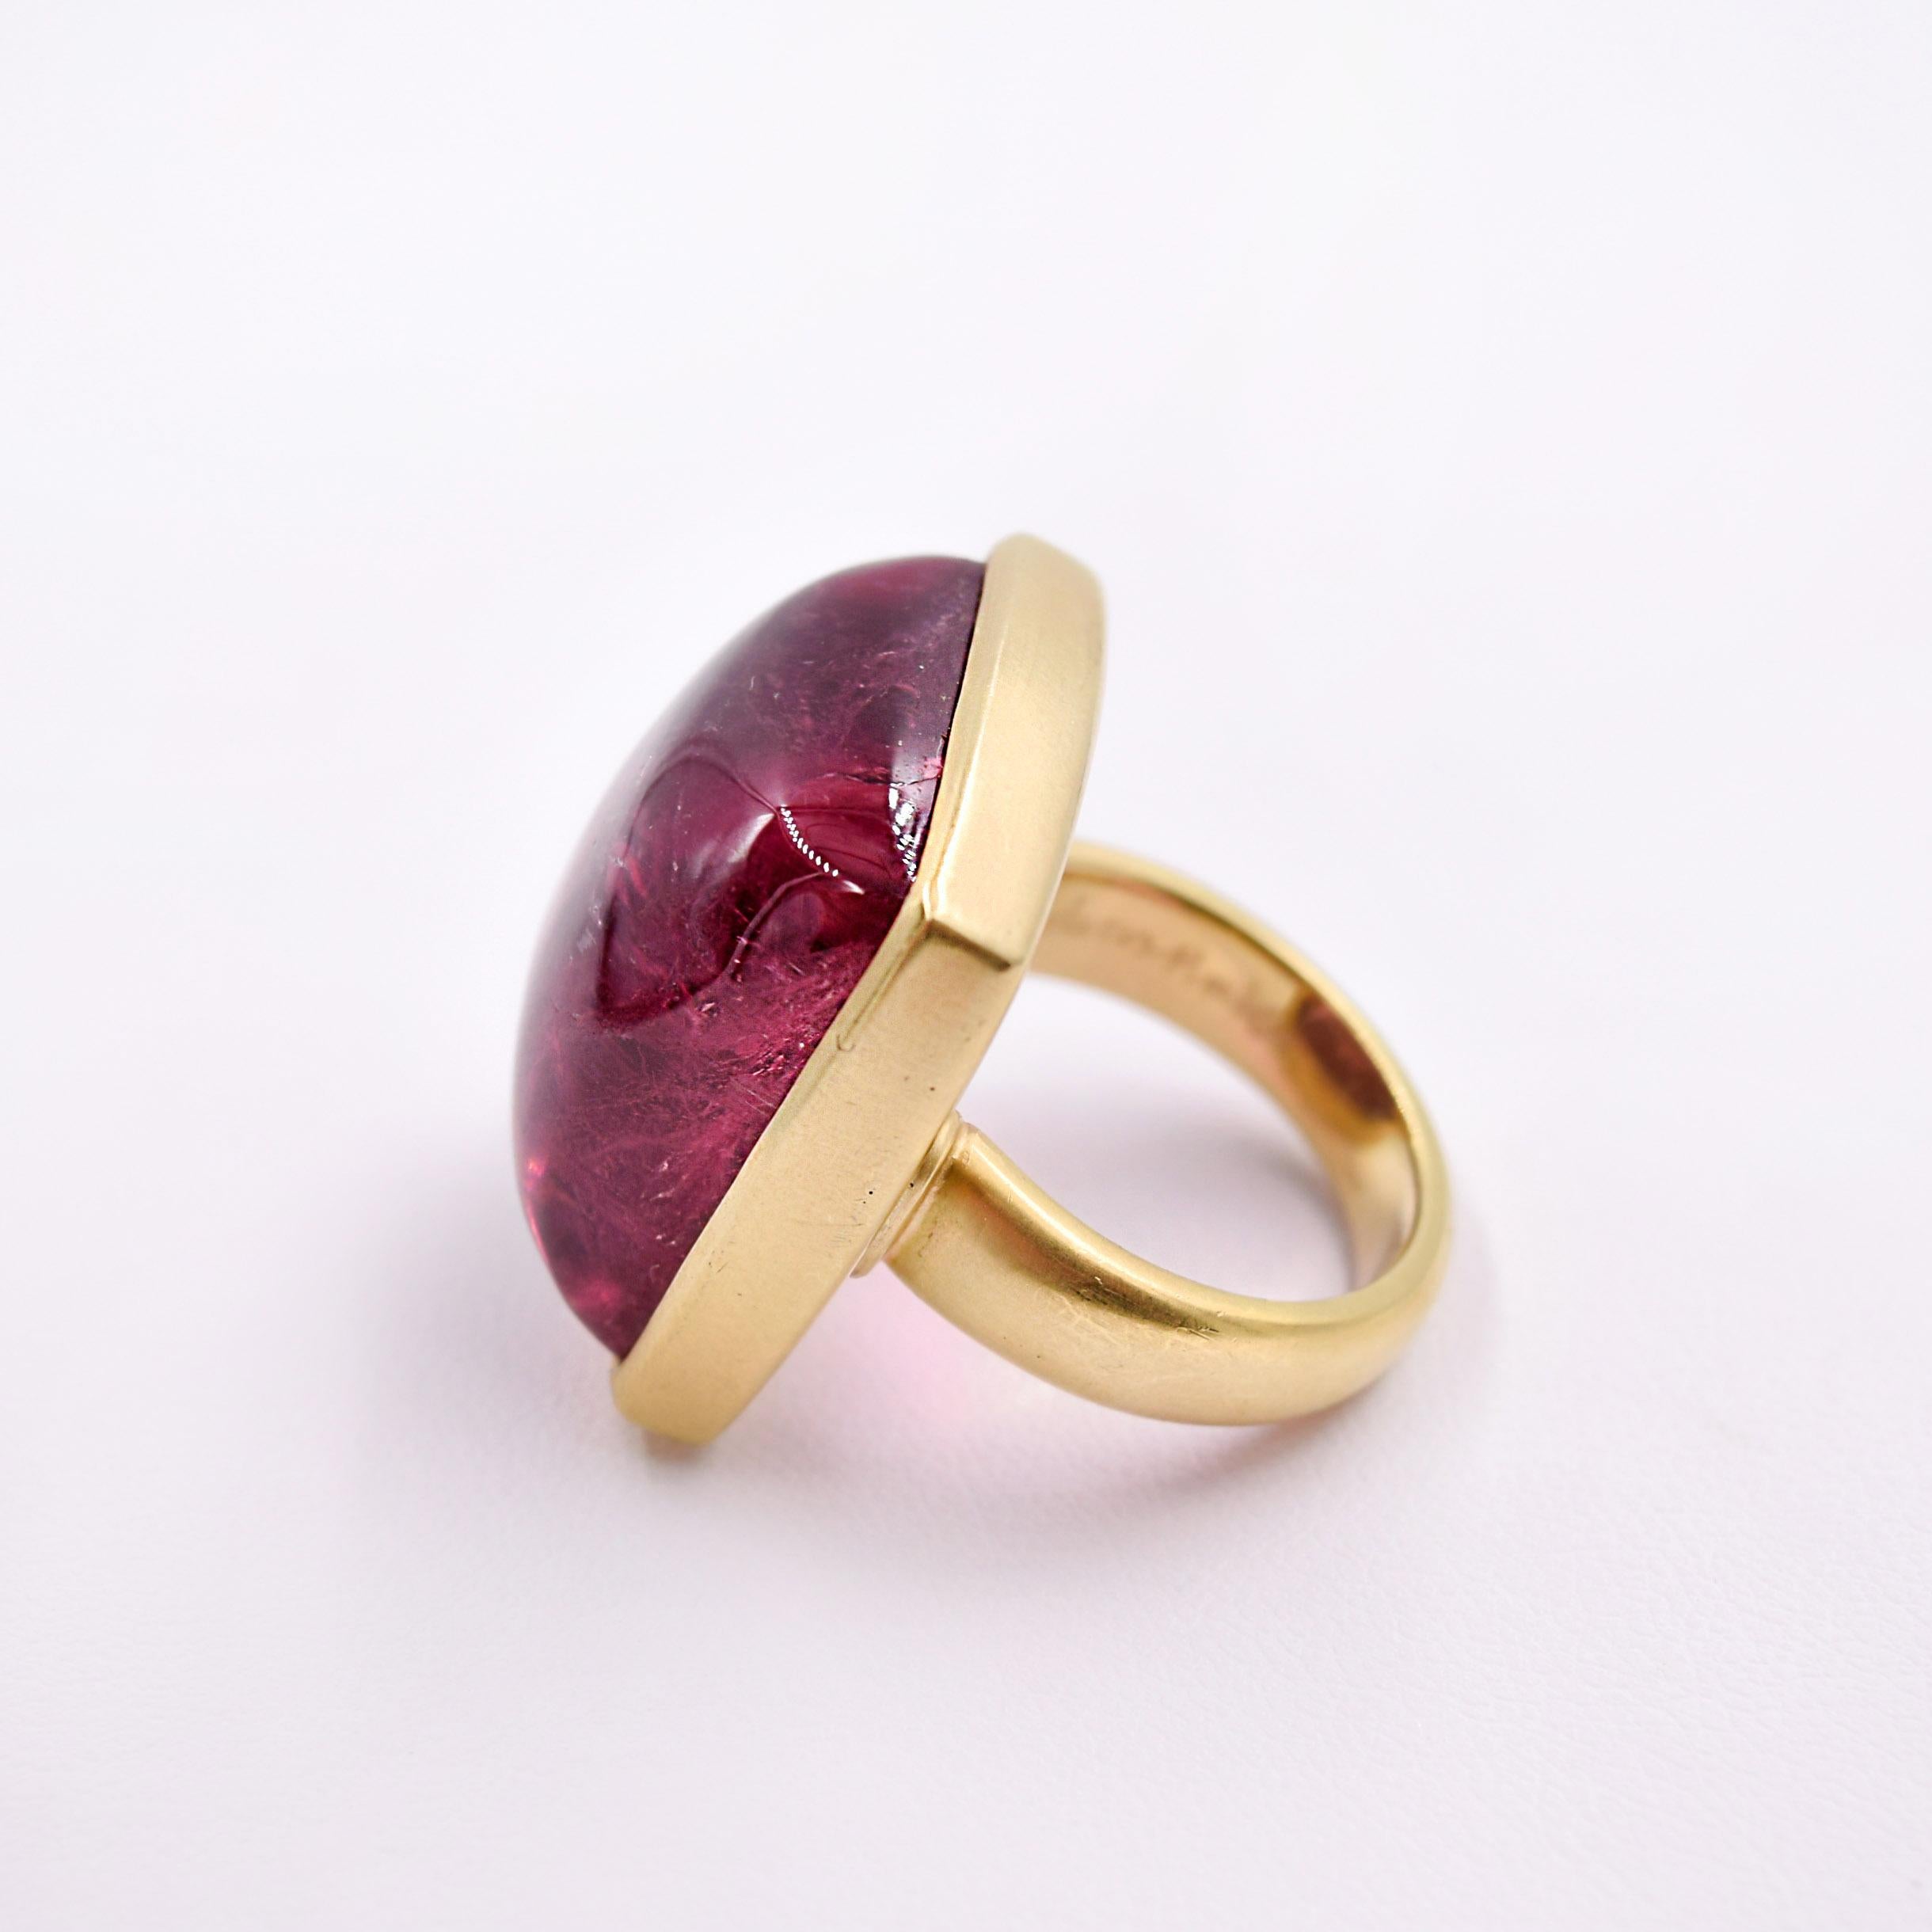 This 54.87ct Cabachon cut Pink Tourmaline Ring speaks for itself!
The Ring has been hand fabricated out of 18K Yellow Gold with a brushed finish, and was designed to be like a yummy piece of candy laying on a pillow of satin gold. 
Size 7 - can be